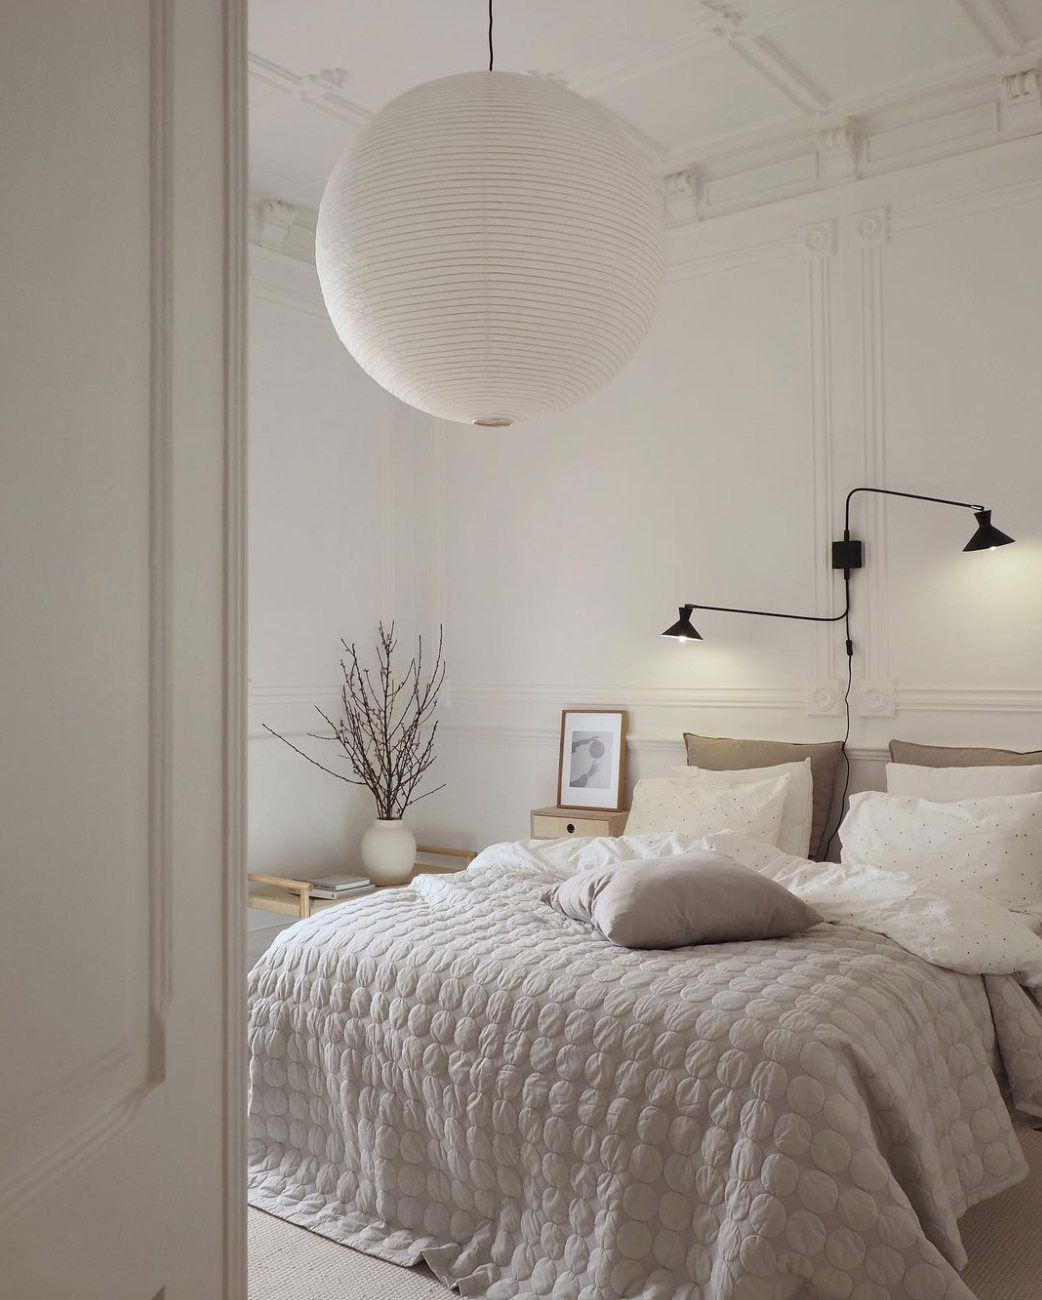 Light and airy Scandi style bedroom with modern decor